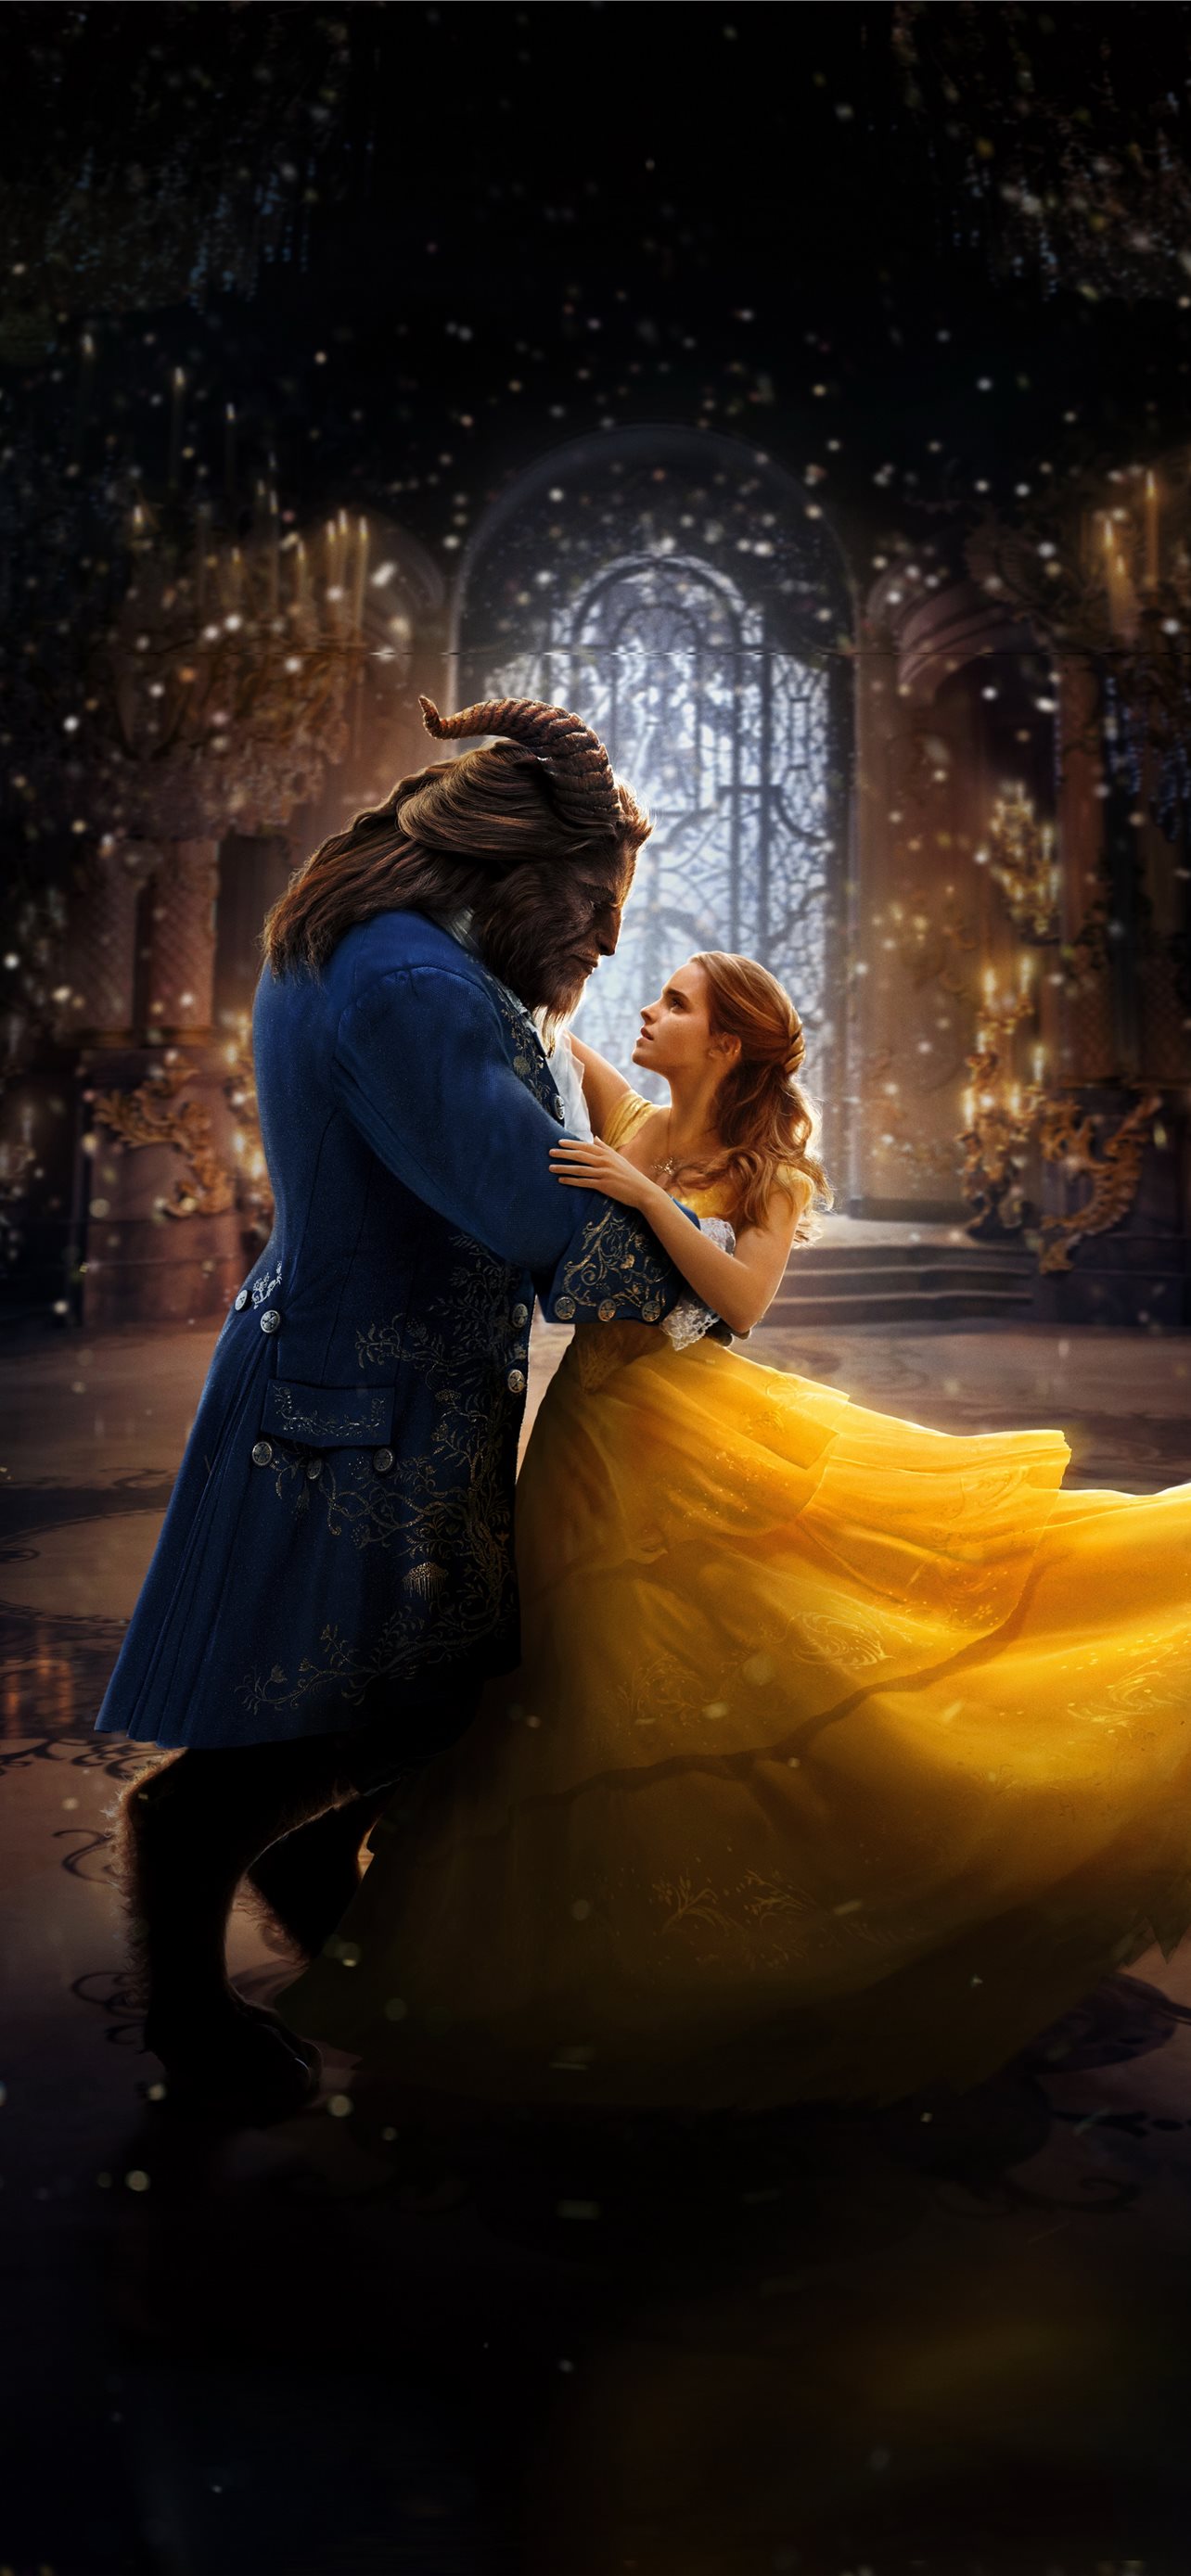 Beauty And The Beast (2012) Wallpapers